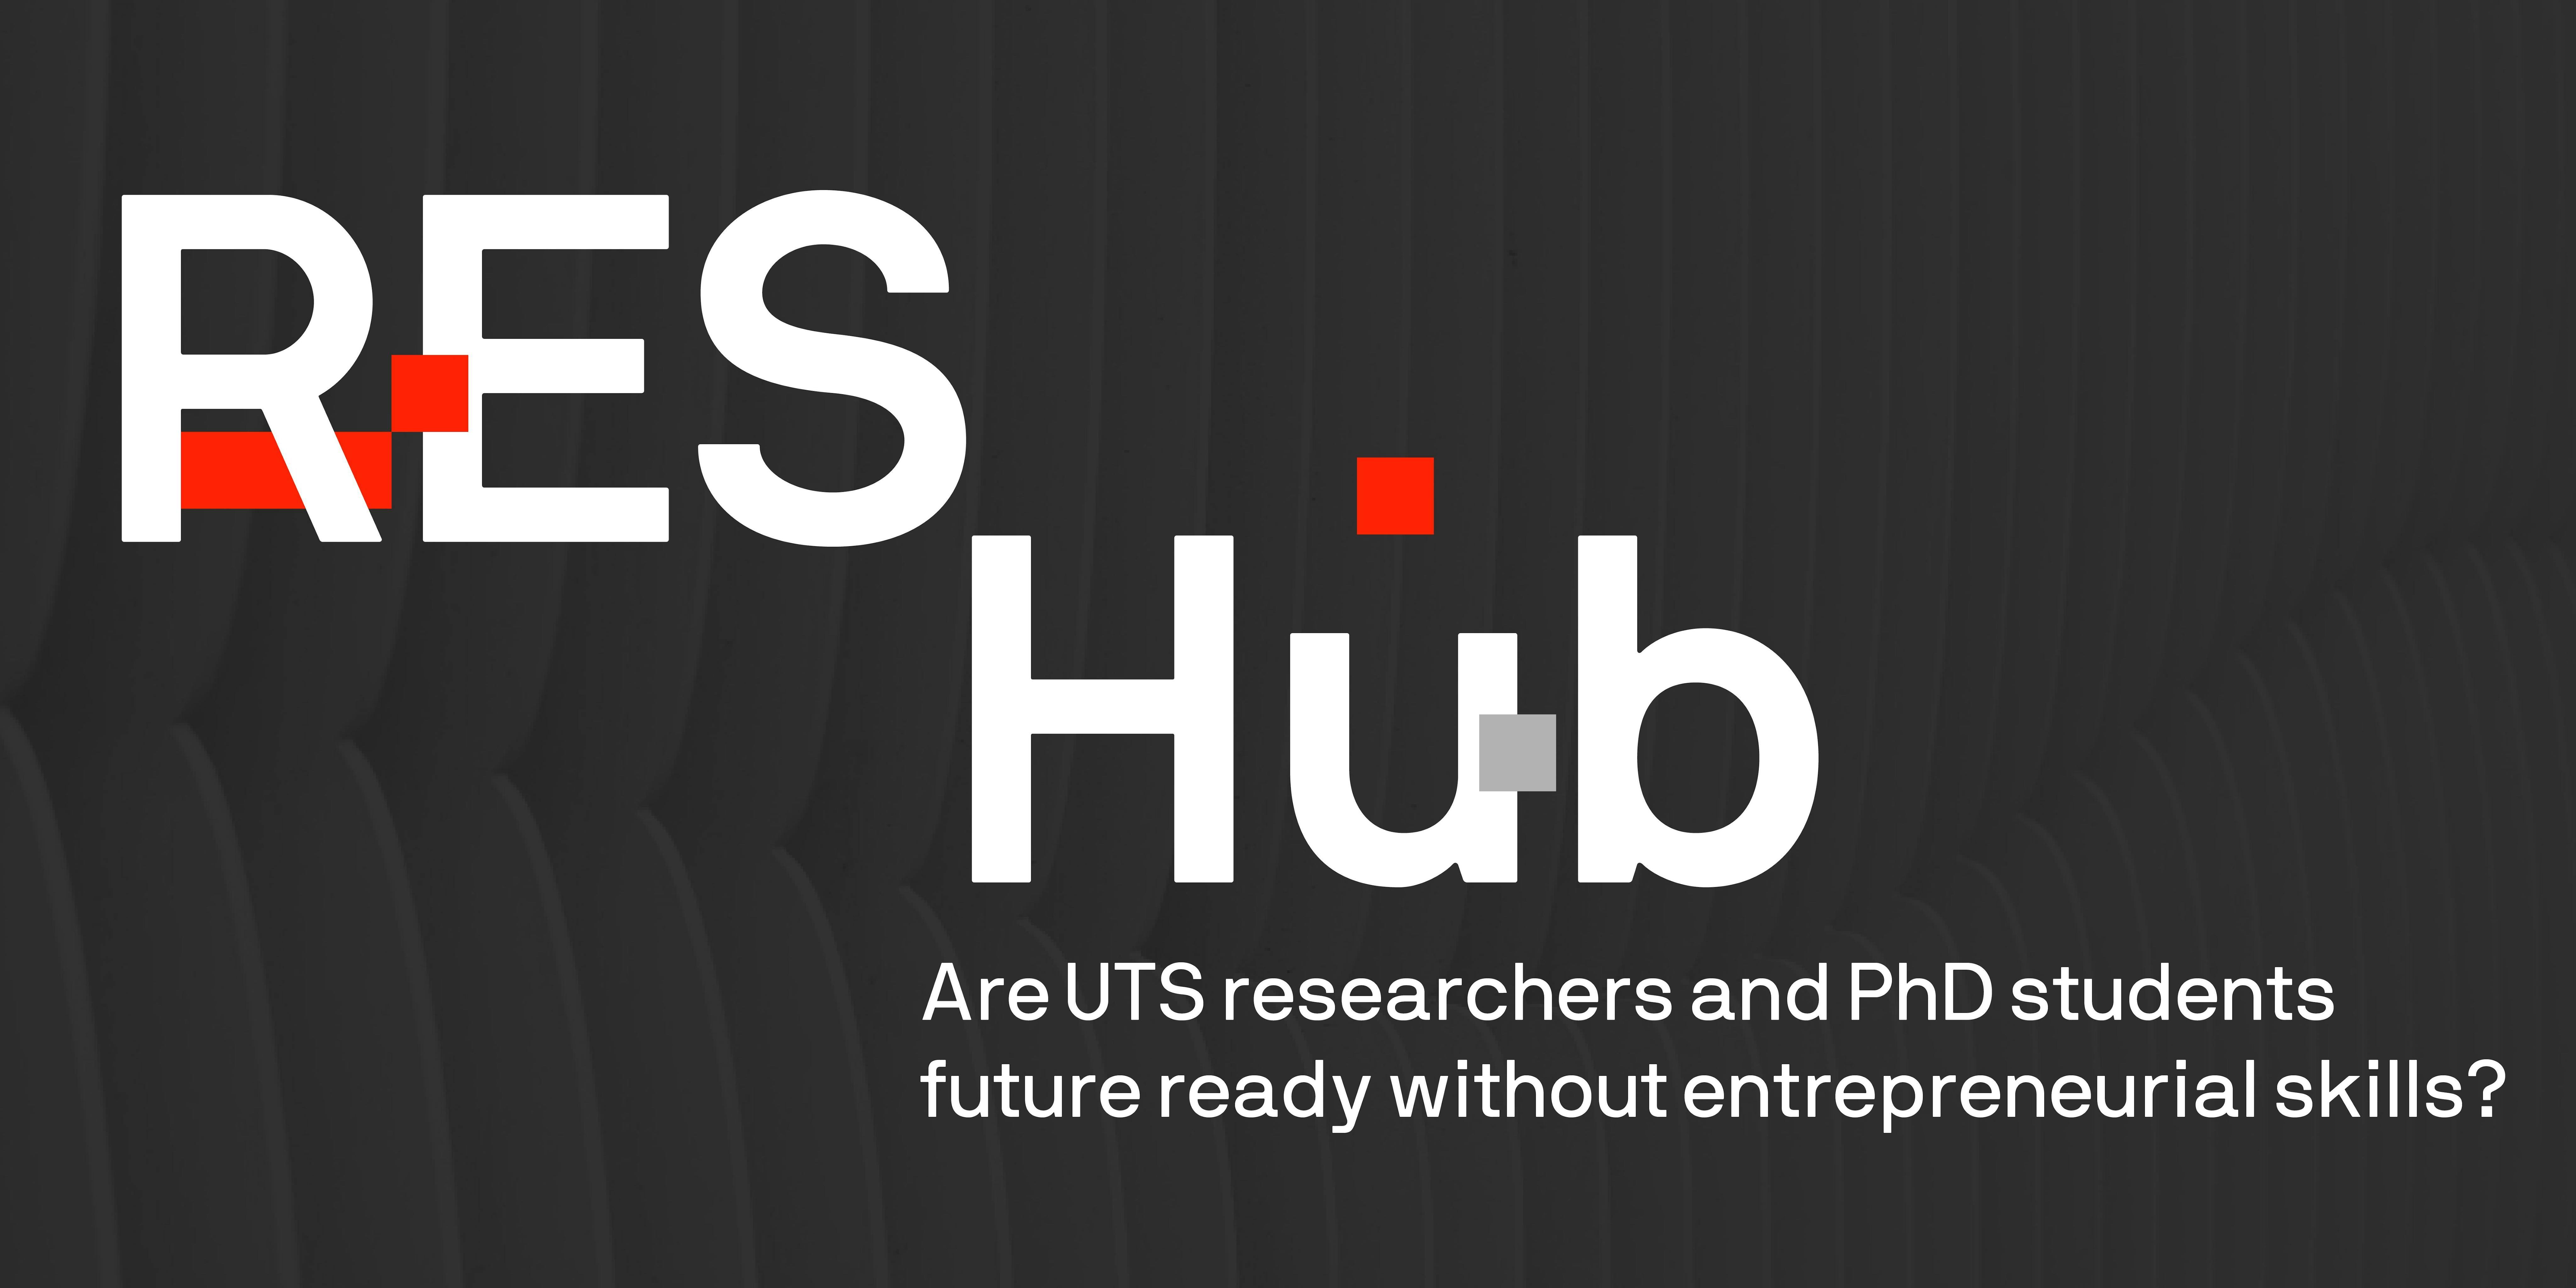 Are UTS researchers and PhD students future ready without entrepreneurial skills?